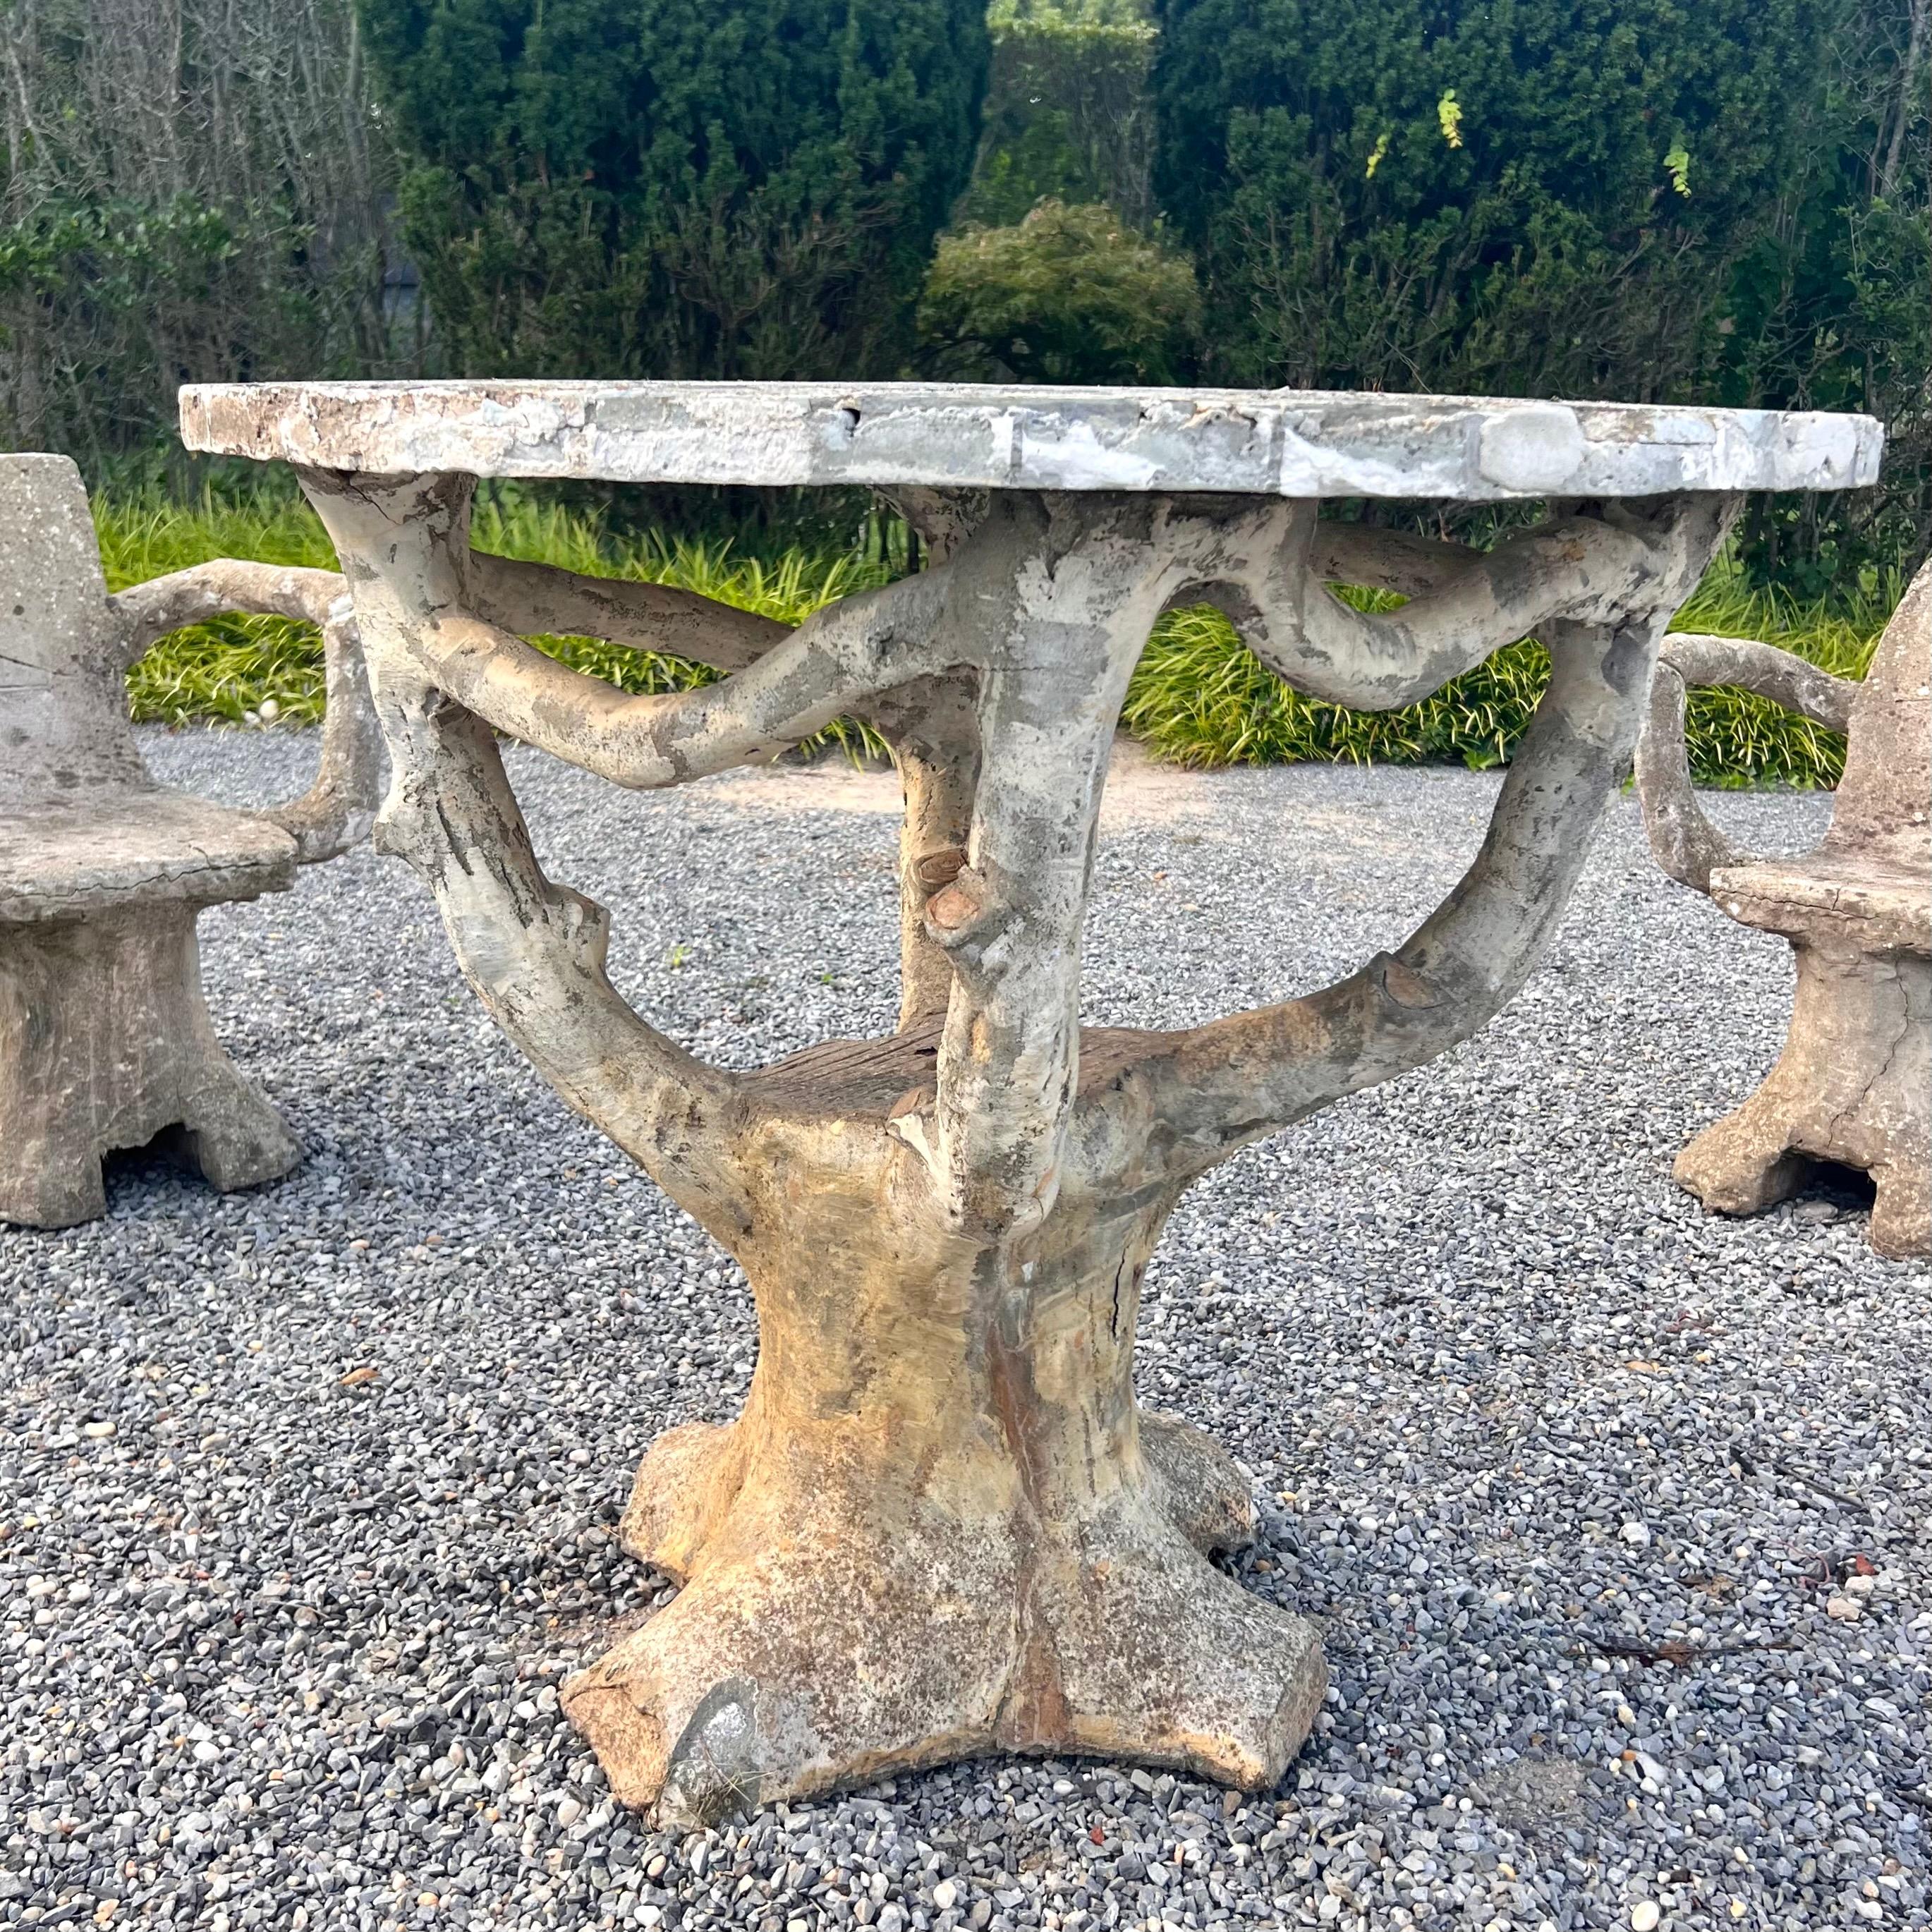 Anthropomorphic Faux Bois Concrete Table and 4 Chairs, 1950s France For Sale 6